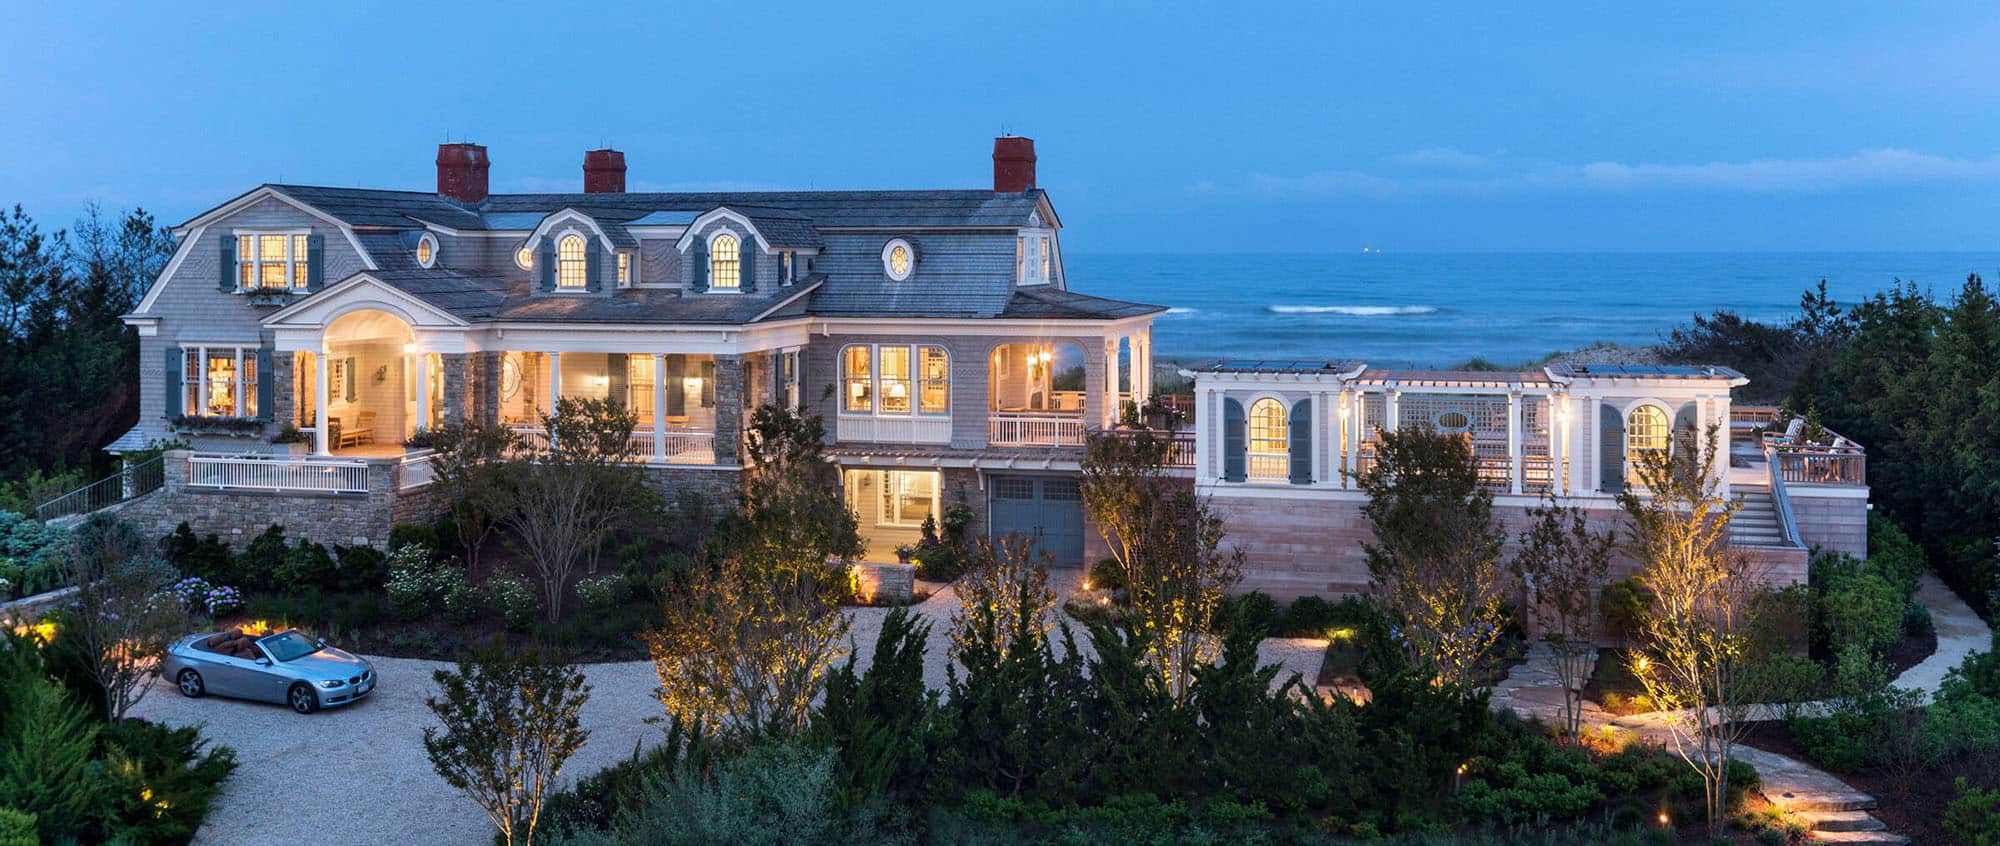 a luxury hamptons home at dusk with the ocean view behind